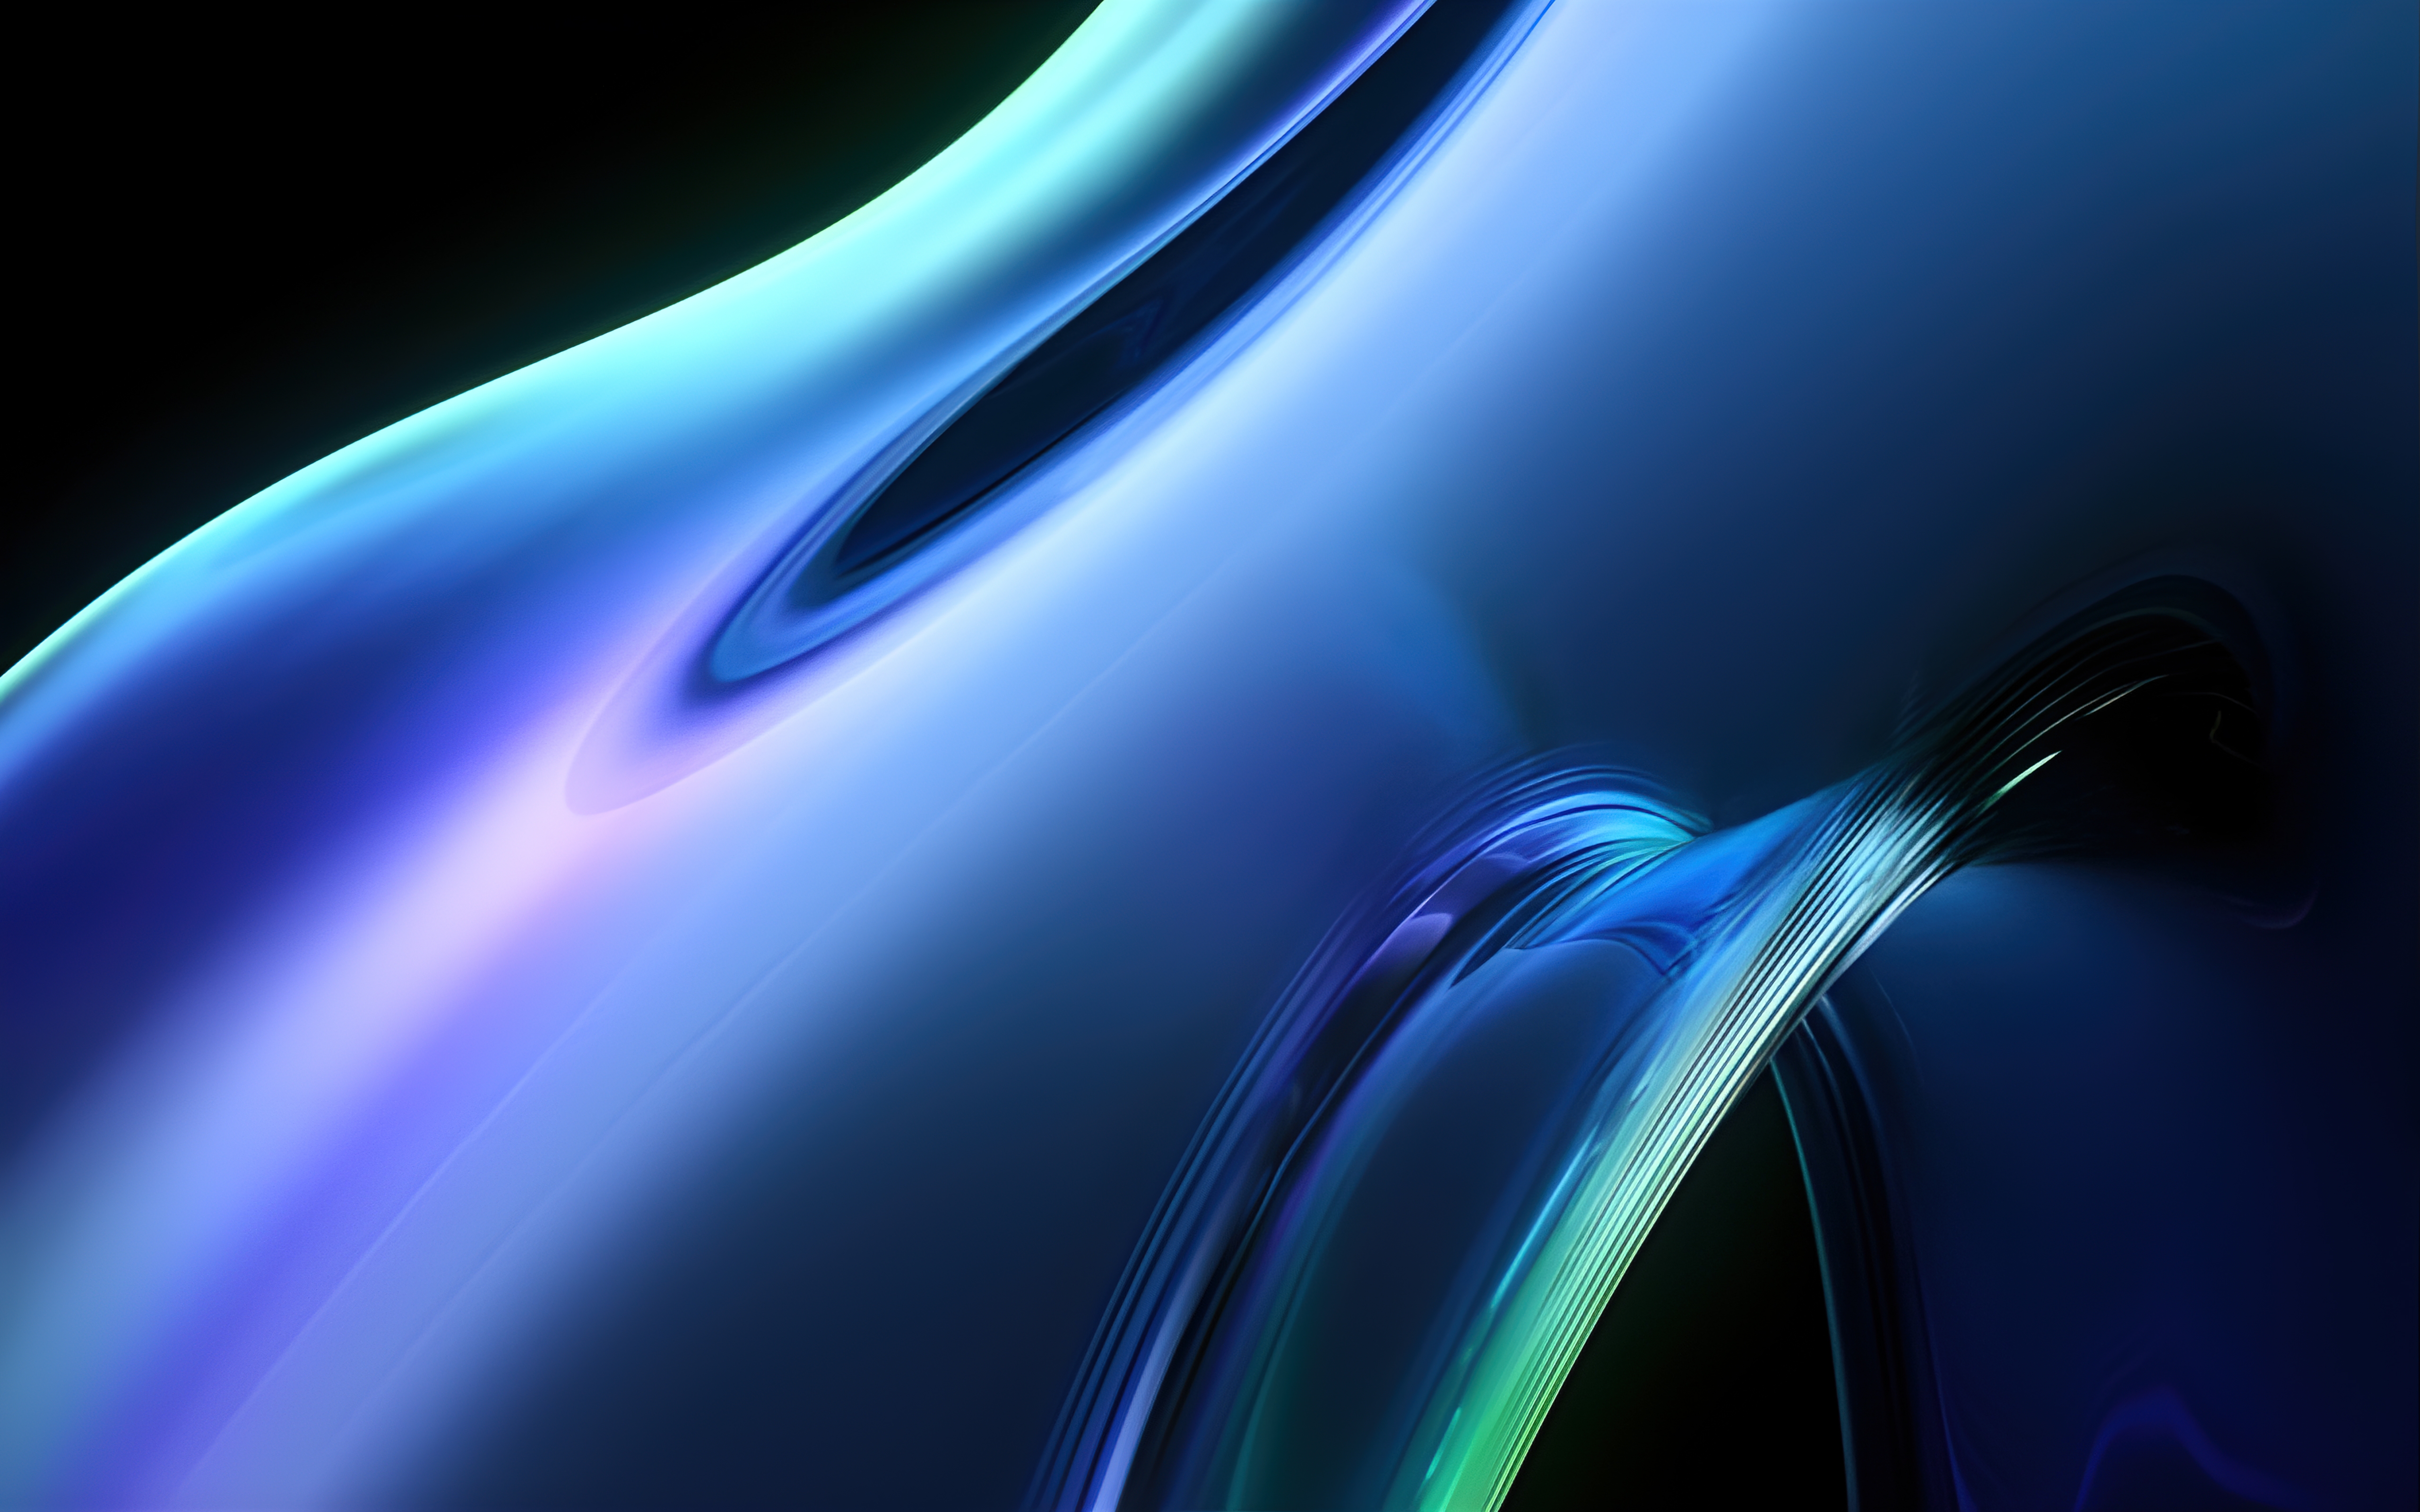 HD wallpaper, Blue Abstract, 5K, Hp Dragonfly Pro, Stock